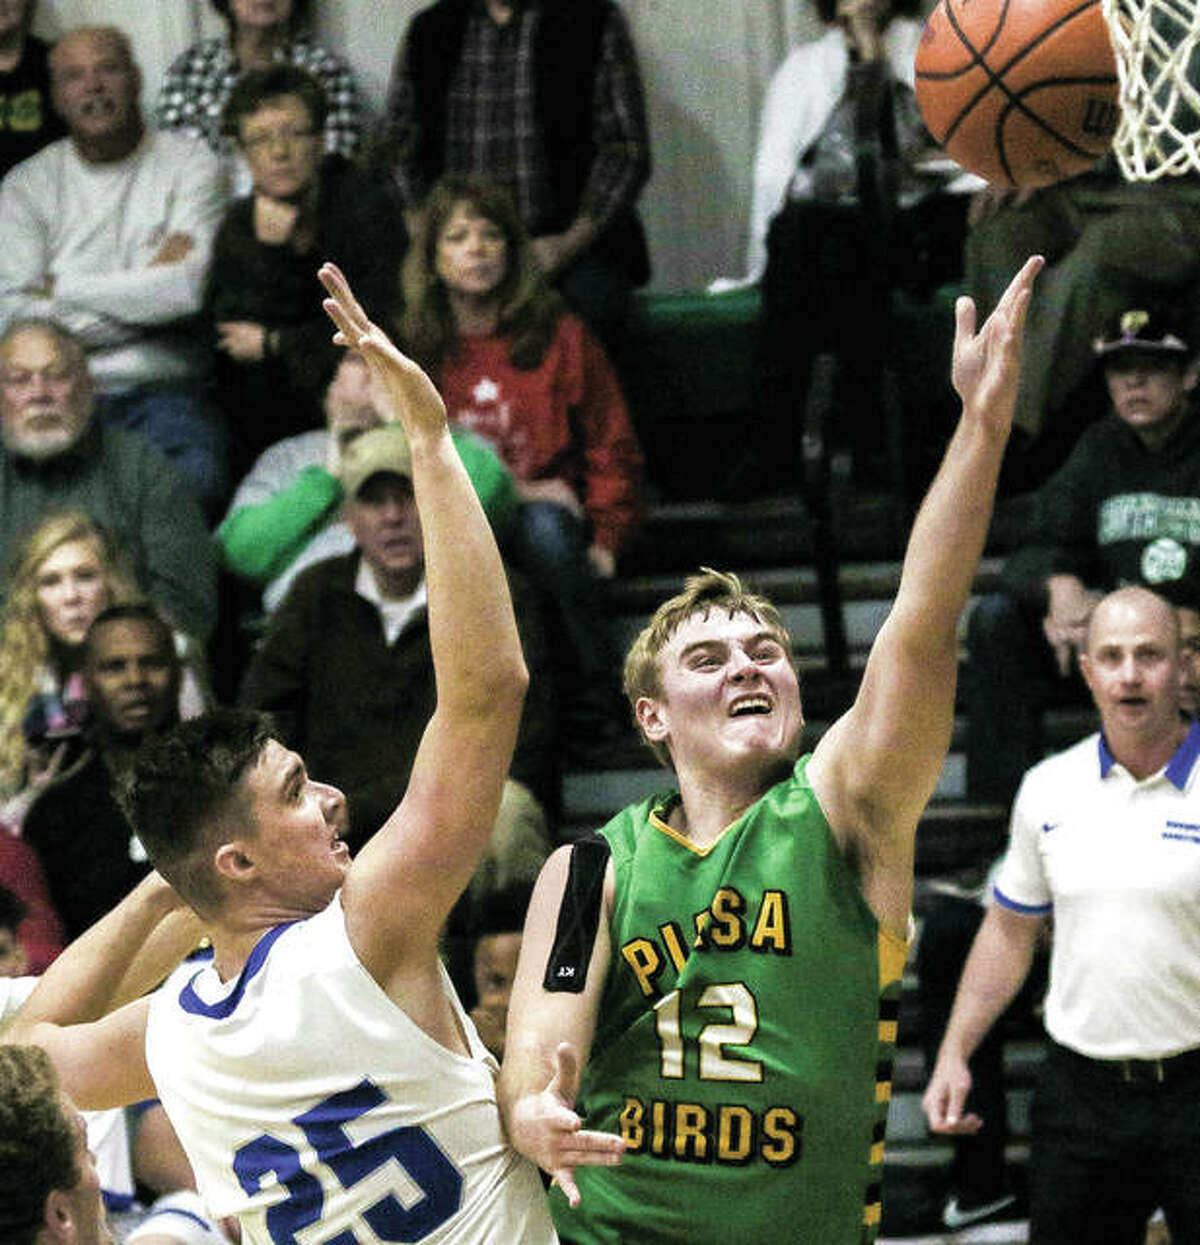 Southwestern’s Caleb Robinson (right) slips past Marquette Catholic’s Jake Hall to put up a shot during a semifinal game at the Metro East Lutheran Tournament on Nov. 24 in Edwardsville. That loss to the Explorers is the Piasa Birds’ lone defeat in a 9-1 start.